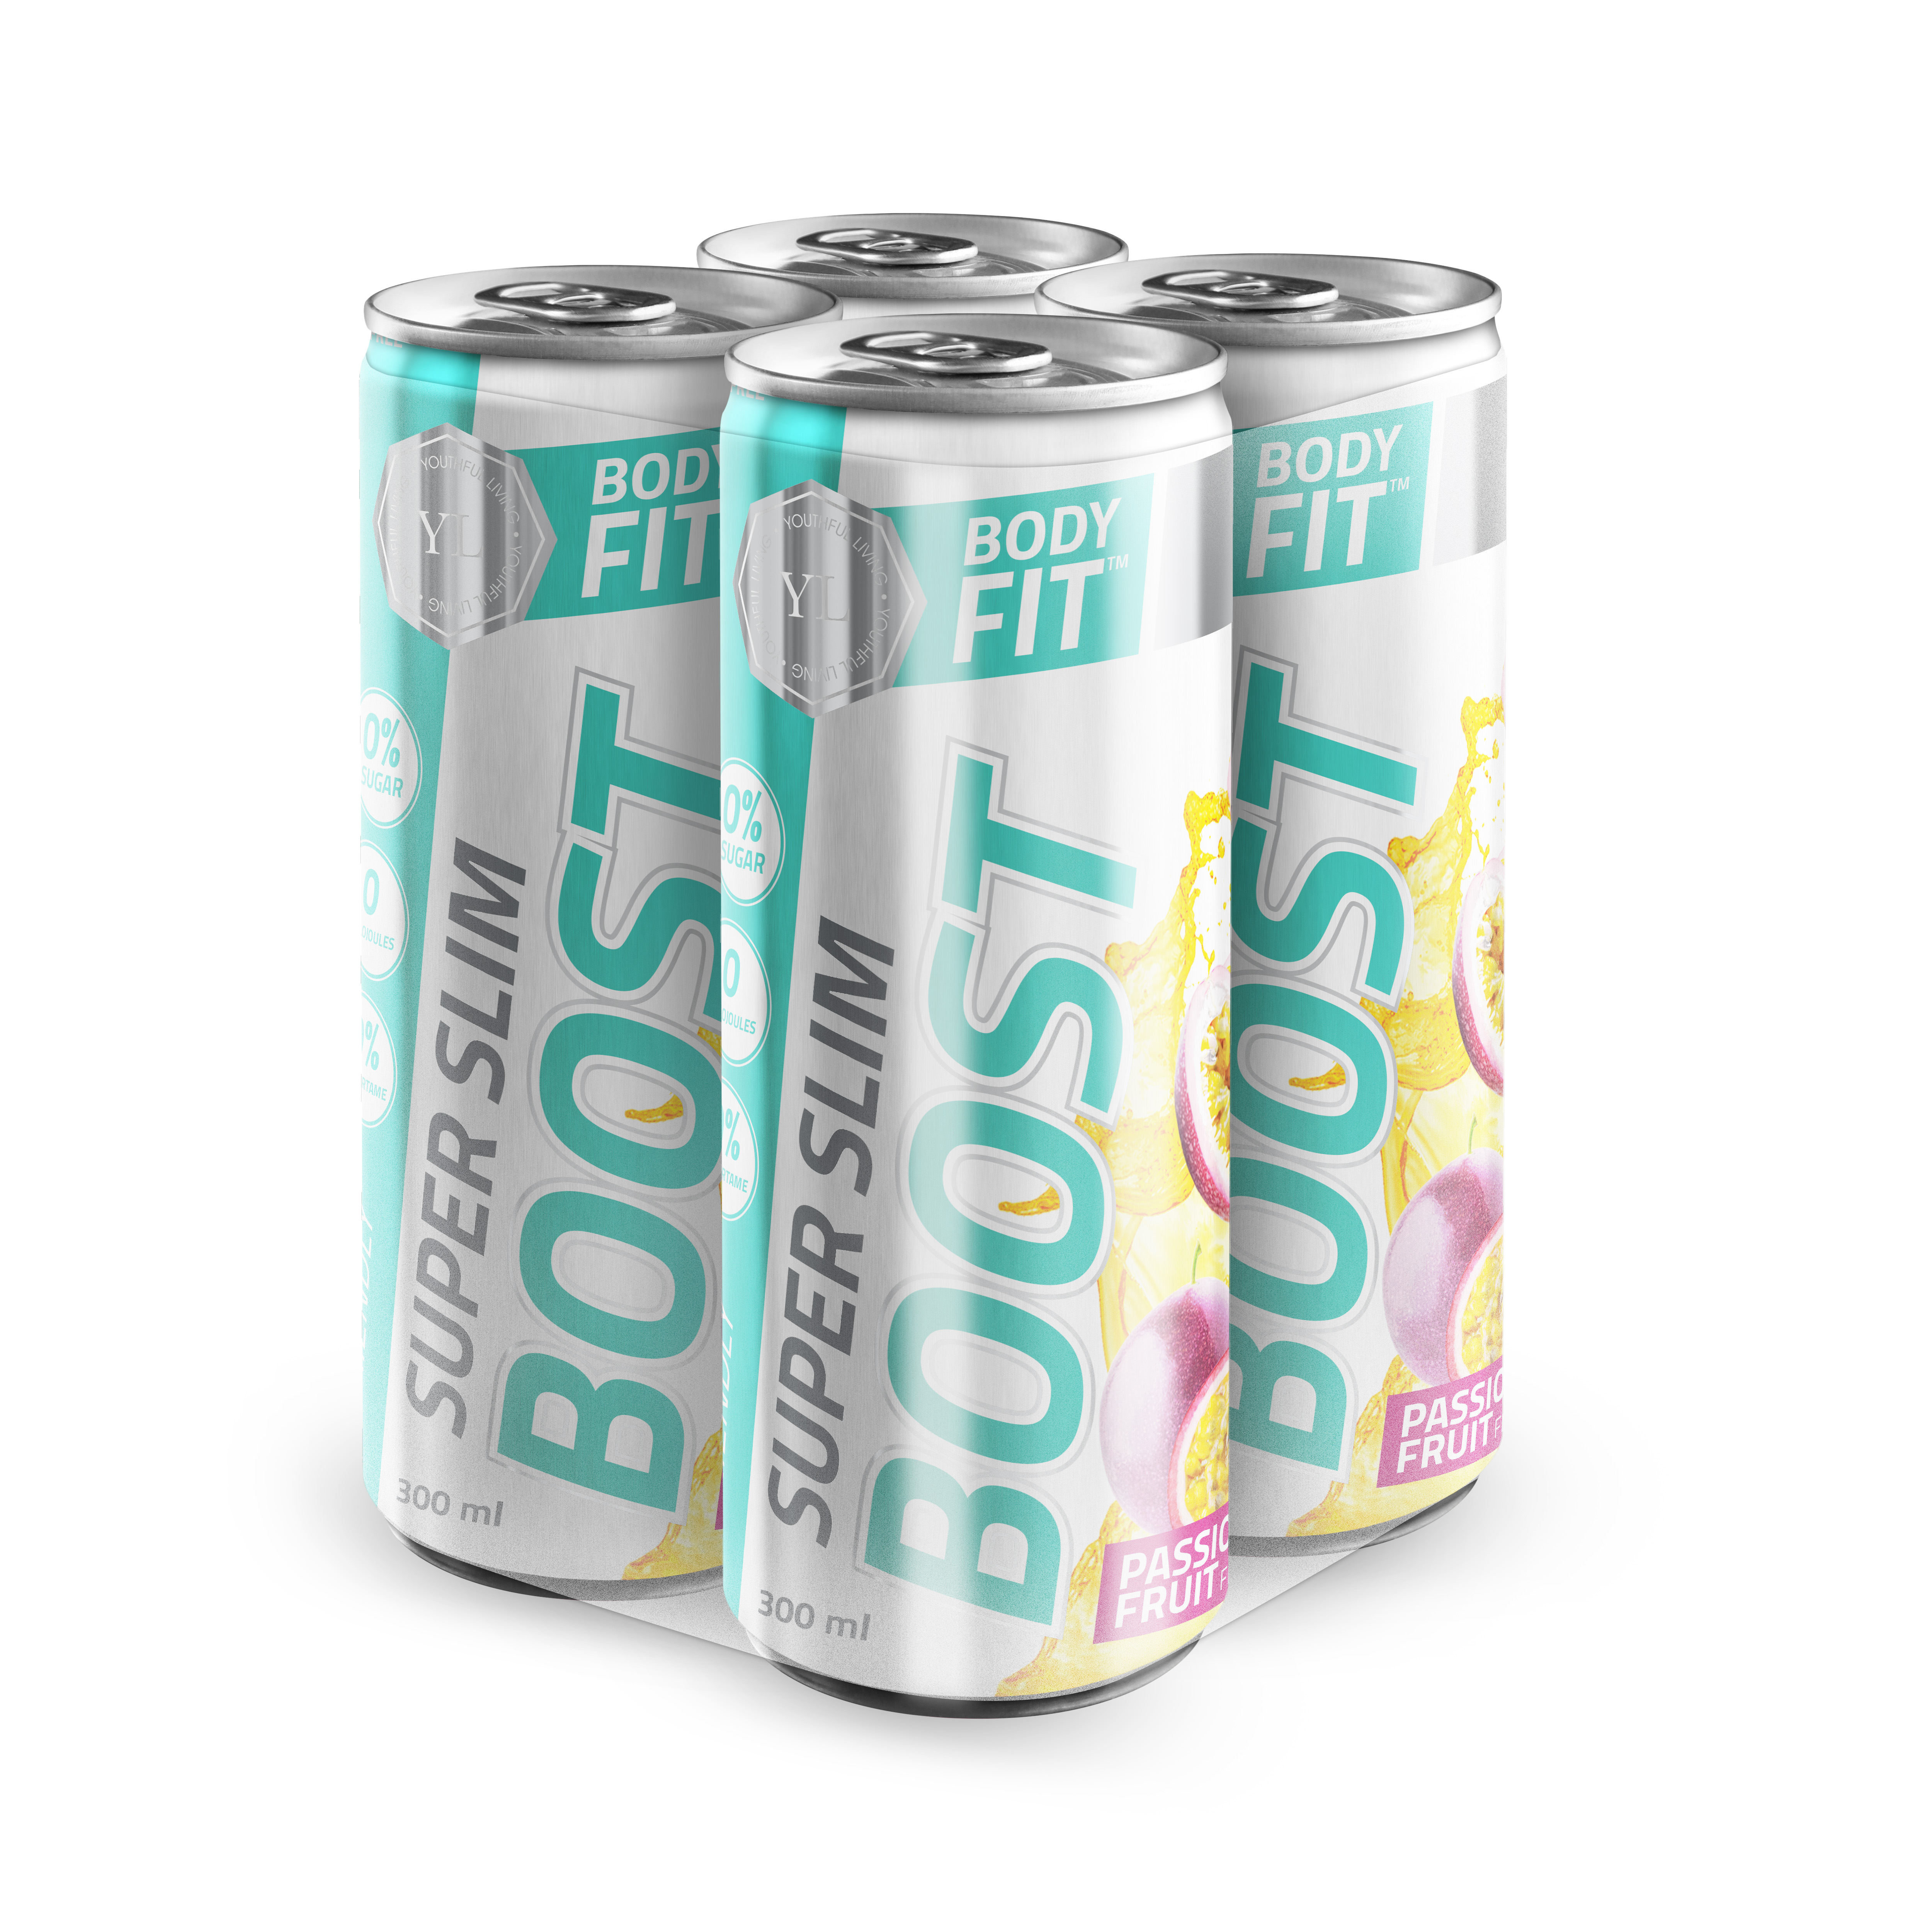 YL BF Super slim Boost 4Pack Passion Fruit